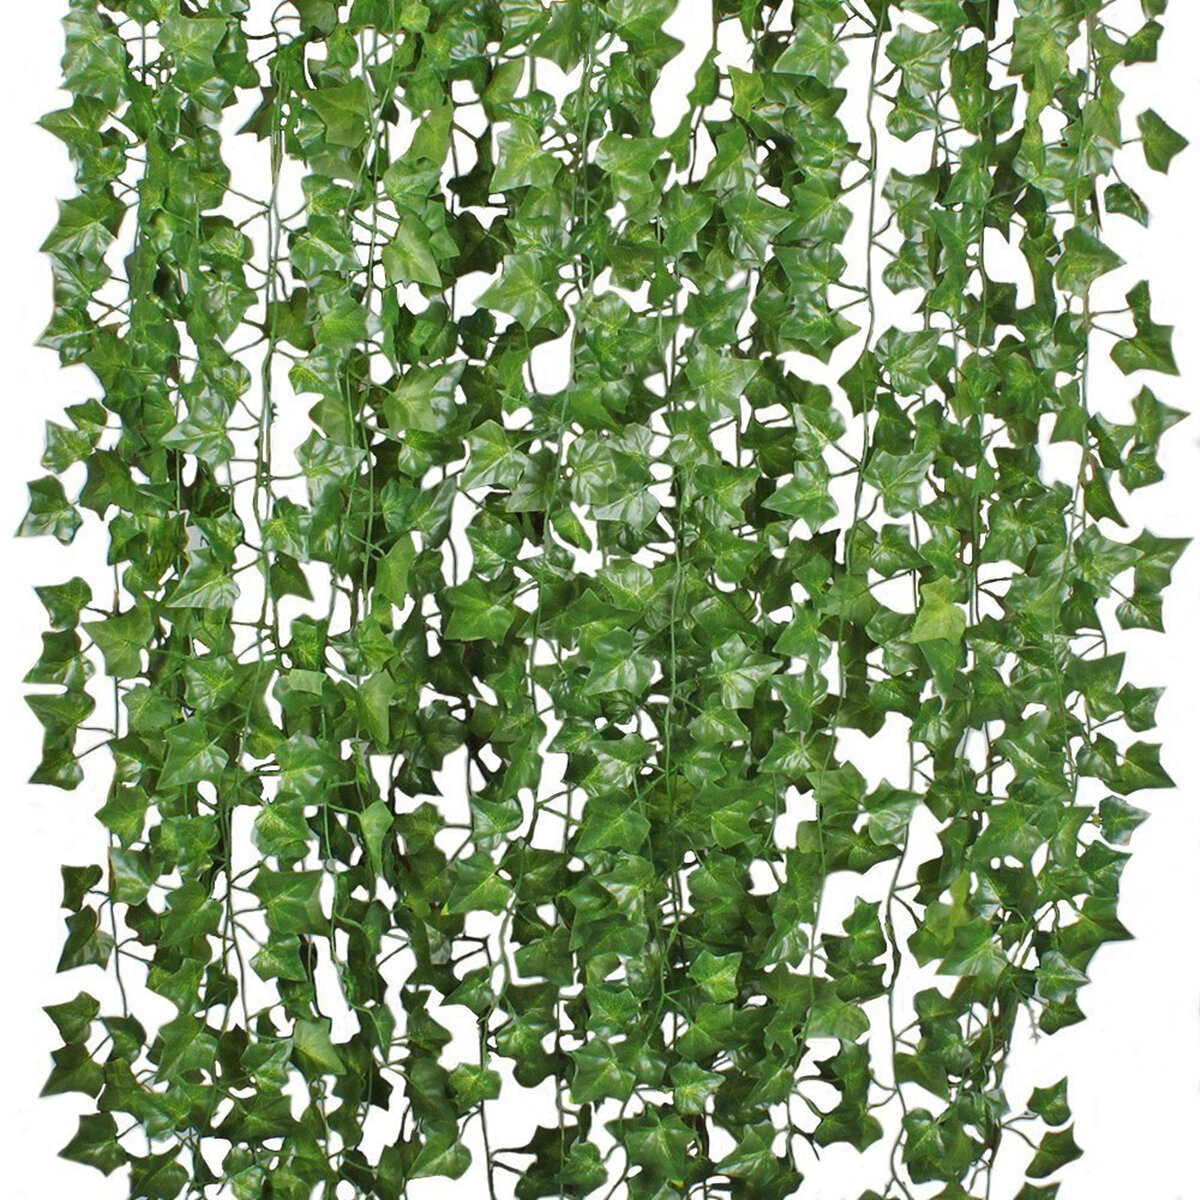 

12pcs Artificial Greenery Vine Ivy Leaves Garland Hanging Wedding Party Garden Decorations